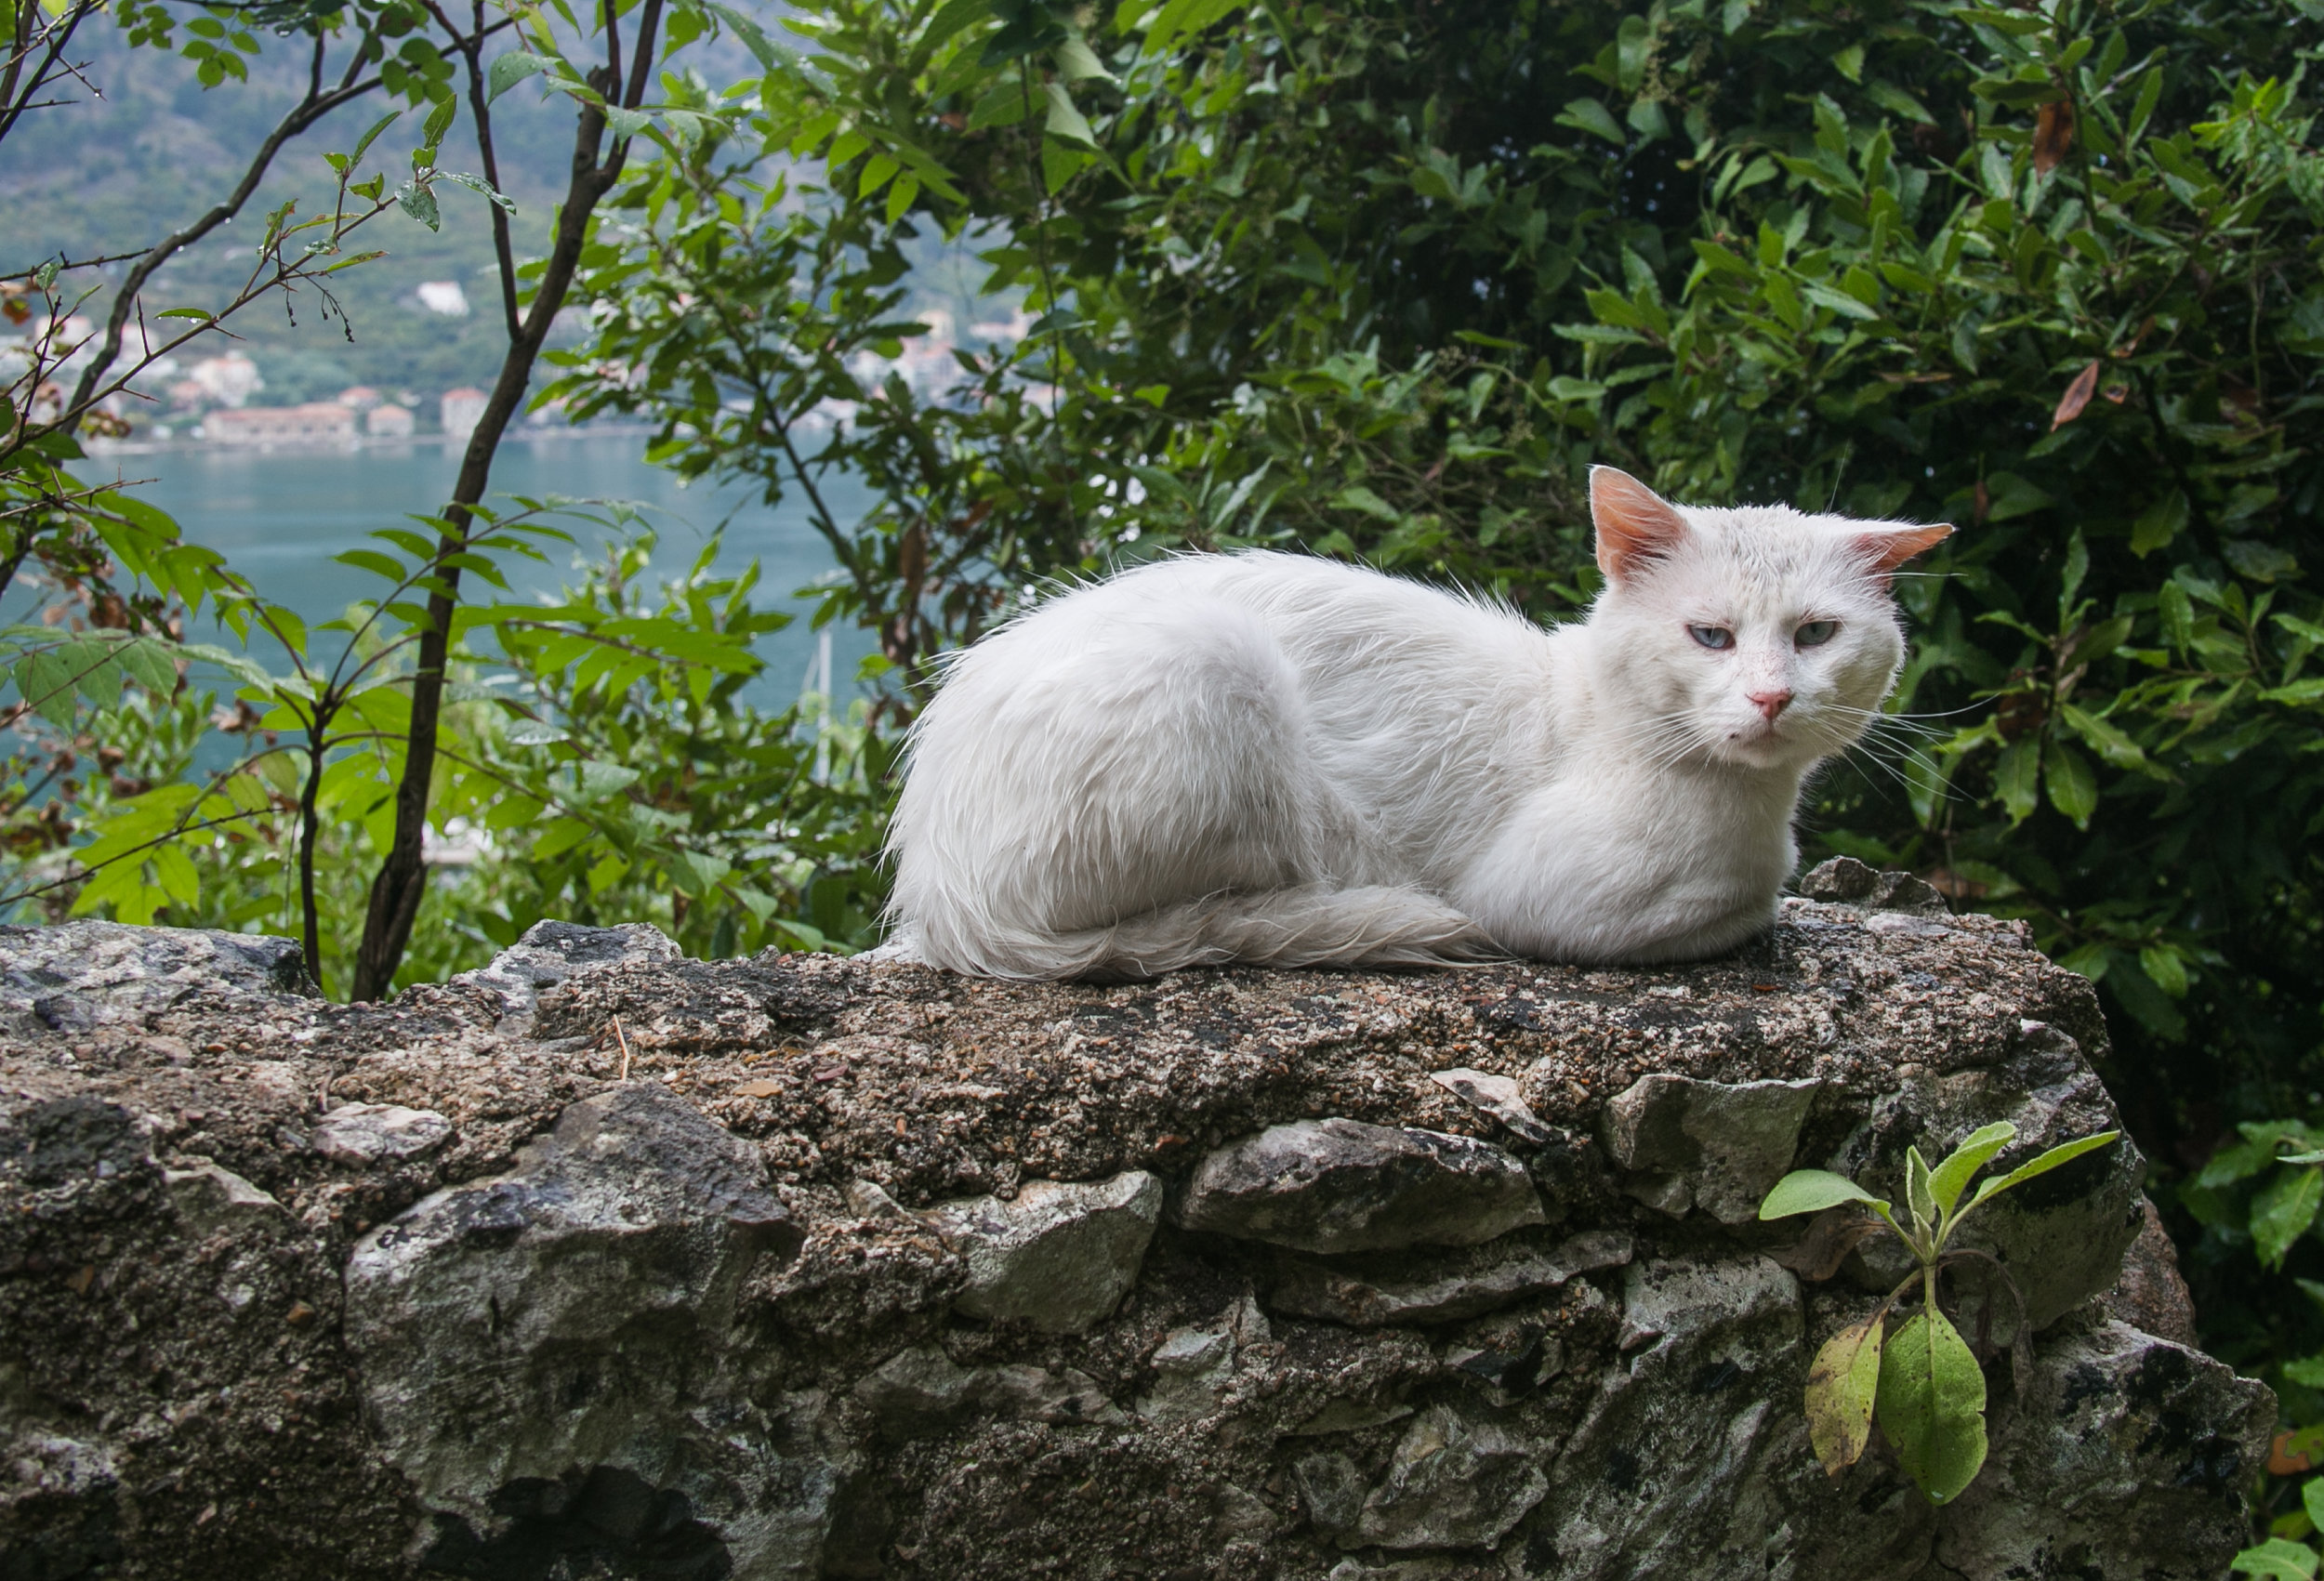  One of the many stray cats roaming around the labyrinth-like streets of the Old City in Kotor, Montenegro.&nbsp; 